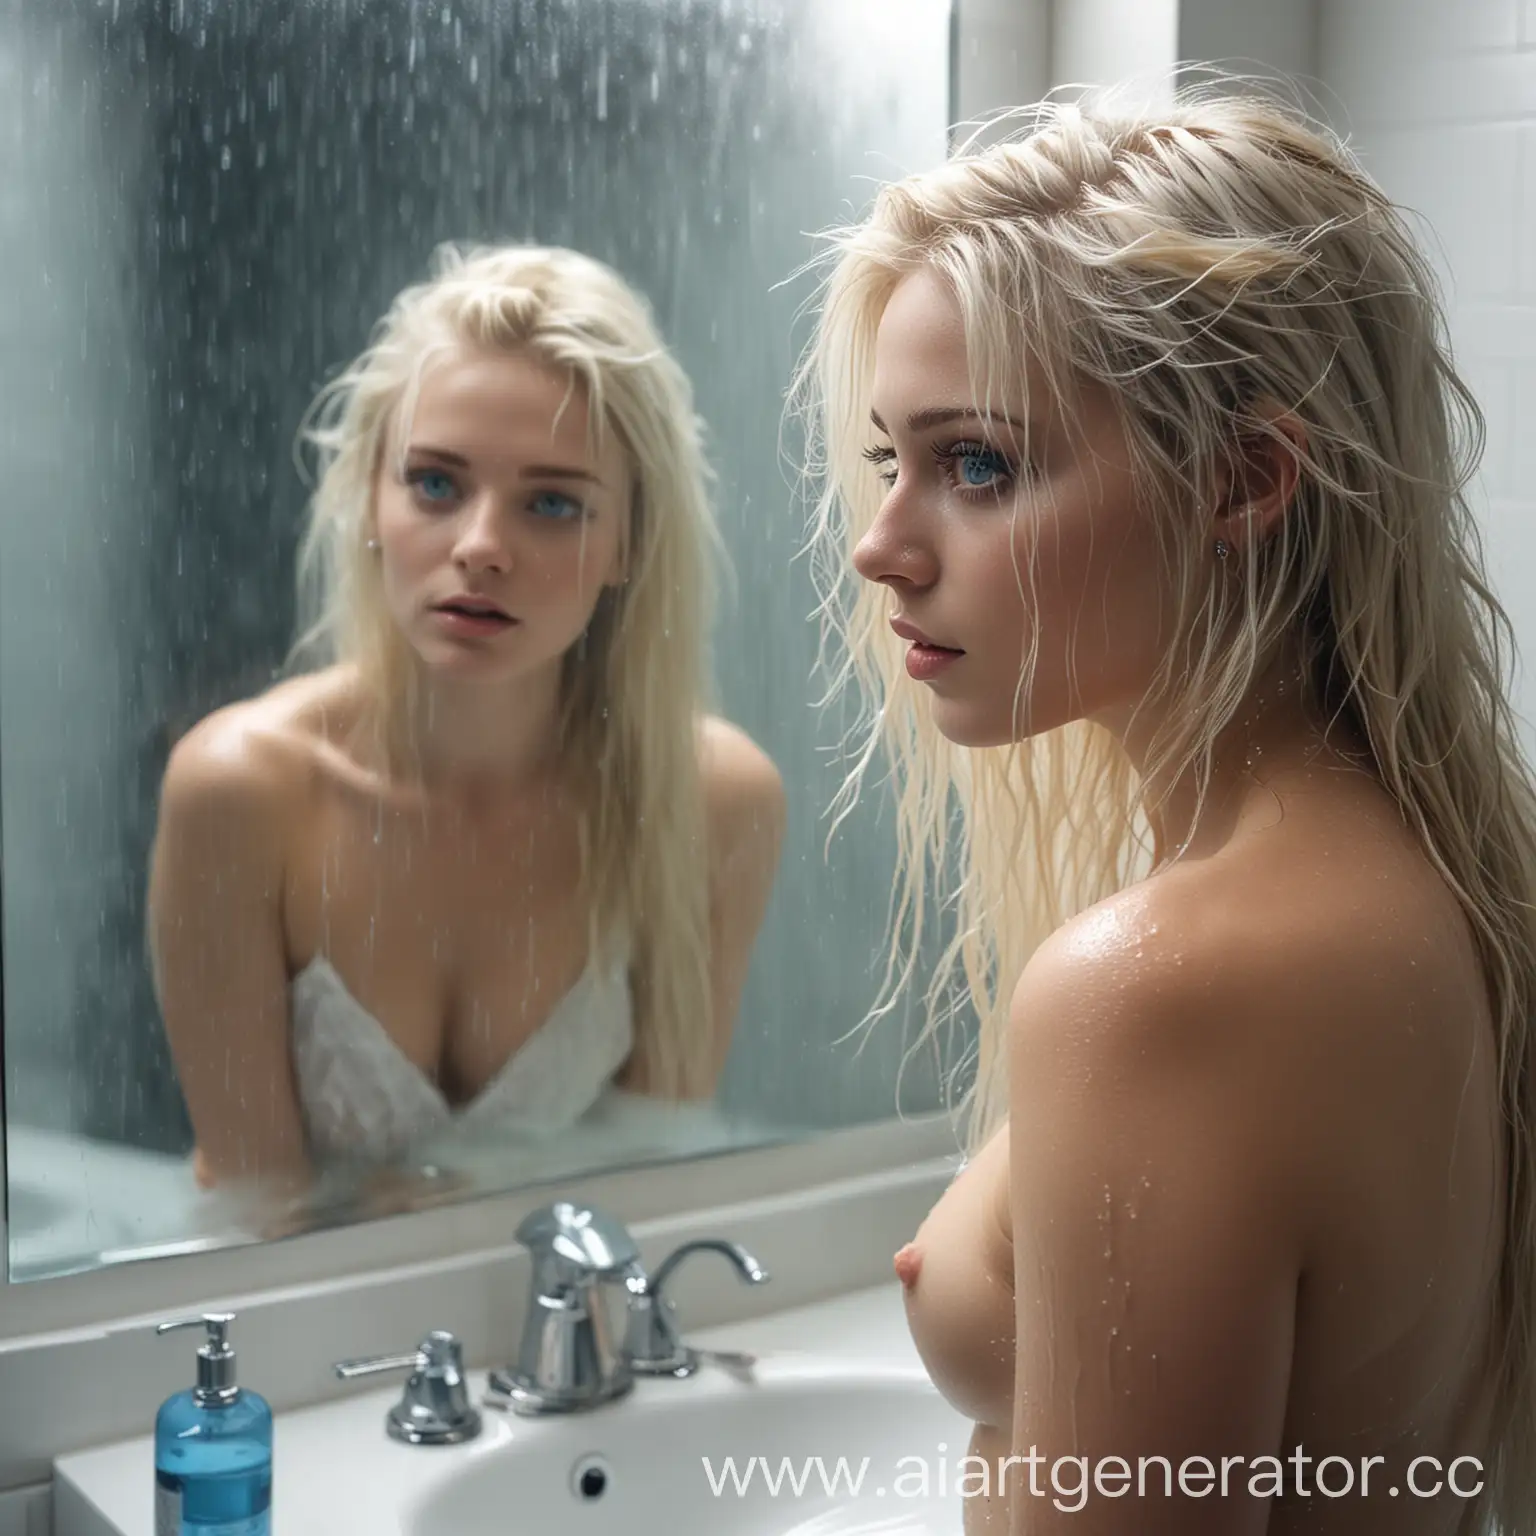 A stunning blonde with piercing blue eyes stands in front of a foggy bathroom mirror, her wet hair cascading down her back as she admires her reflection in the misty glass.